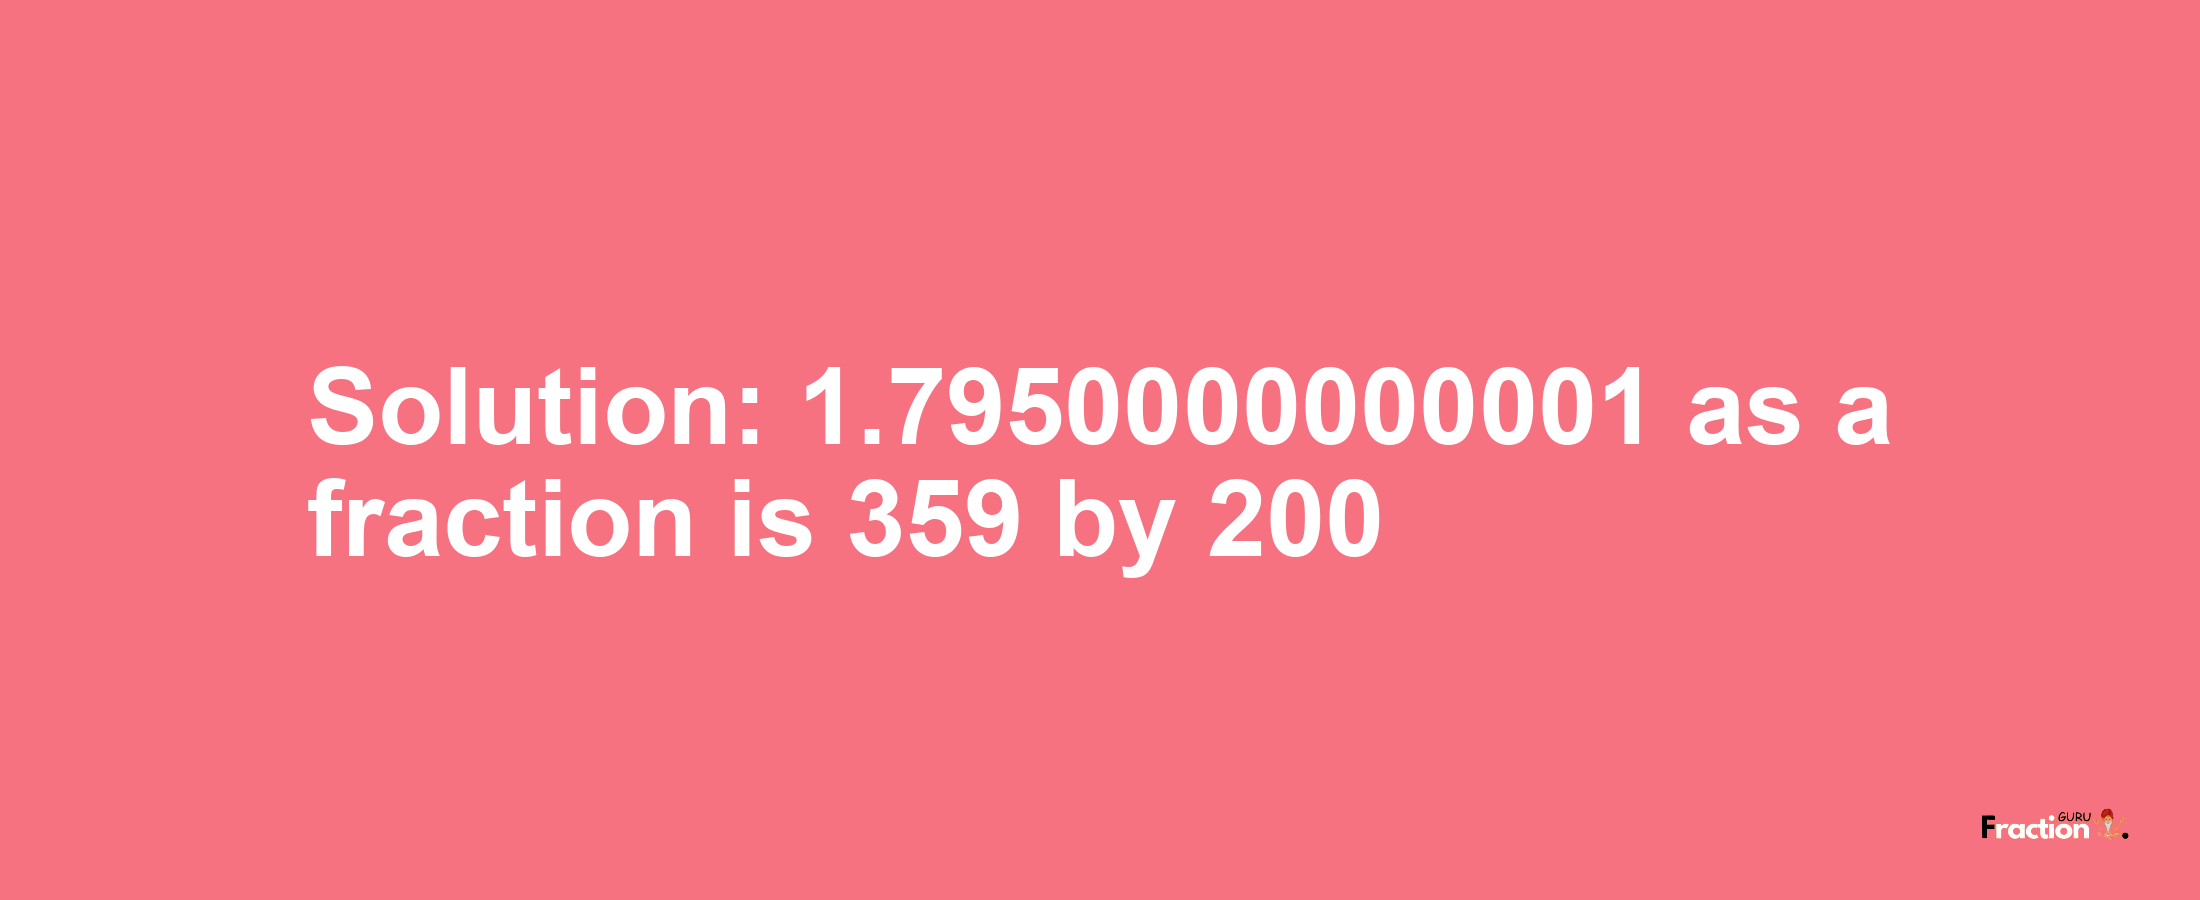 Solution:1.7950000000001 as a fraction is 359/200